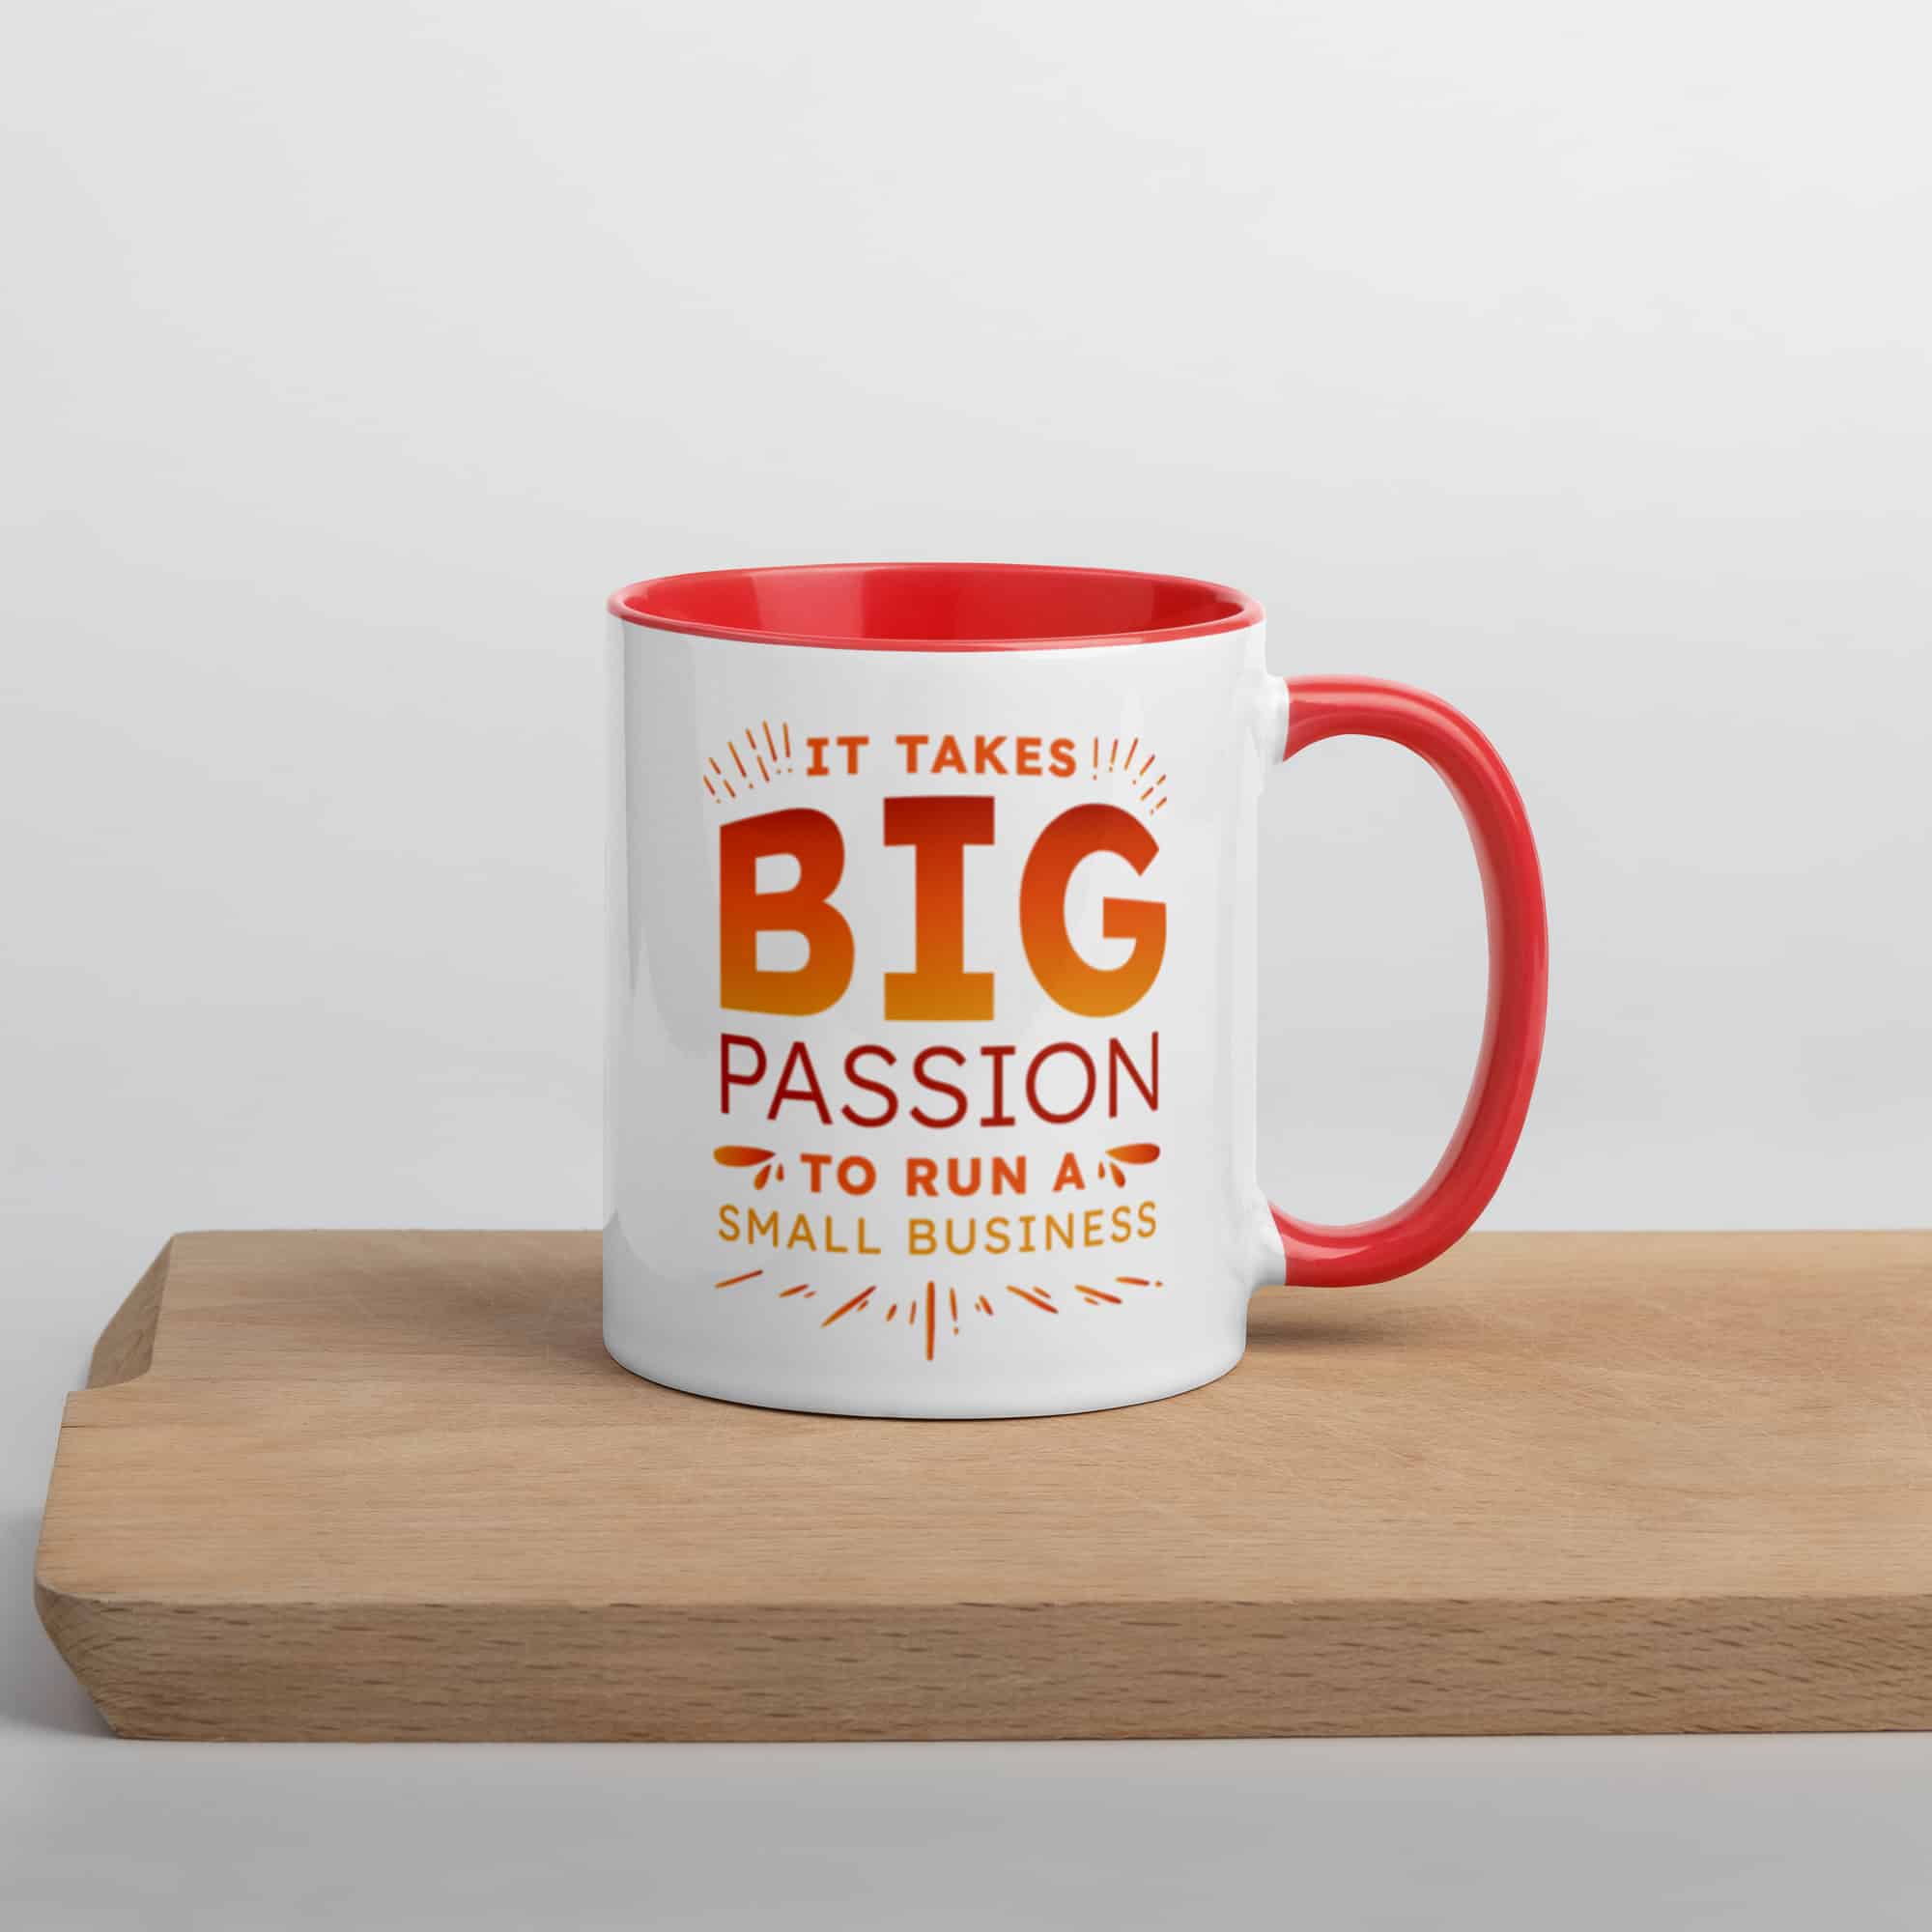 Follow Your Passion: Are You Ready To Pay Some Price? - THE STORY MUG